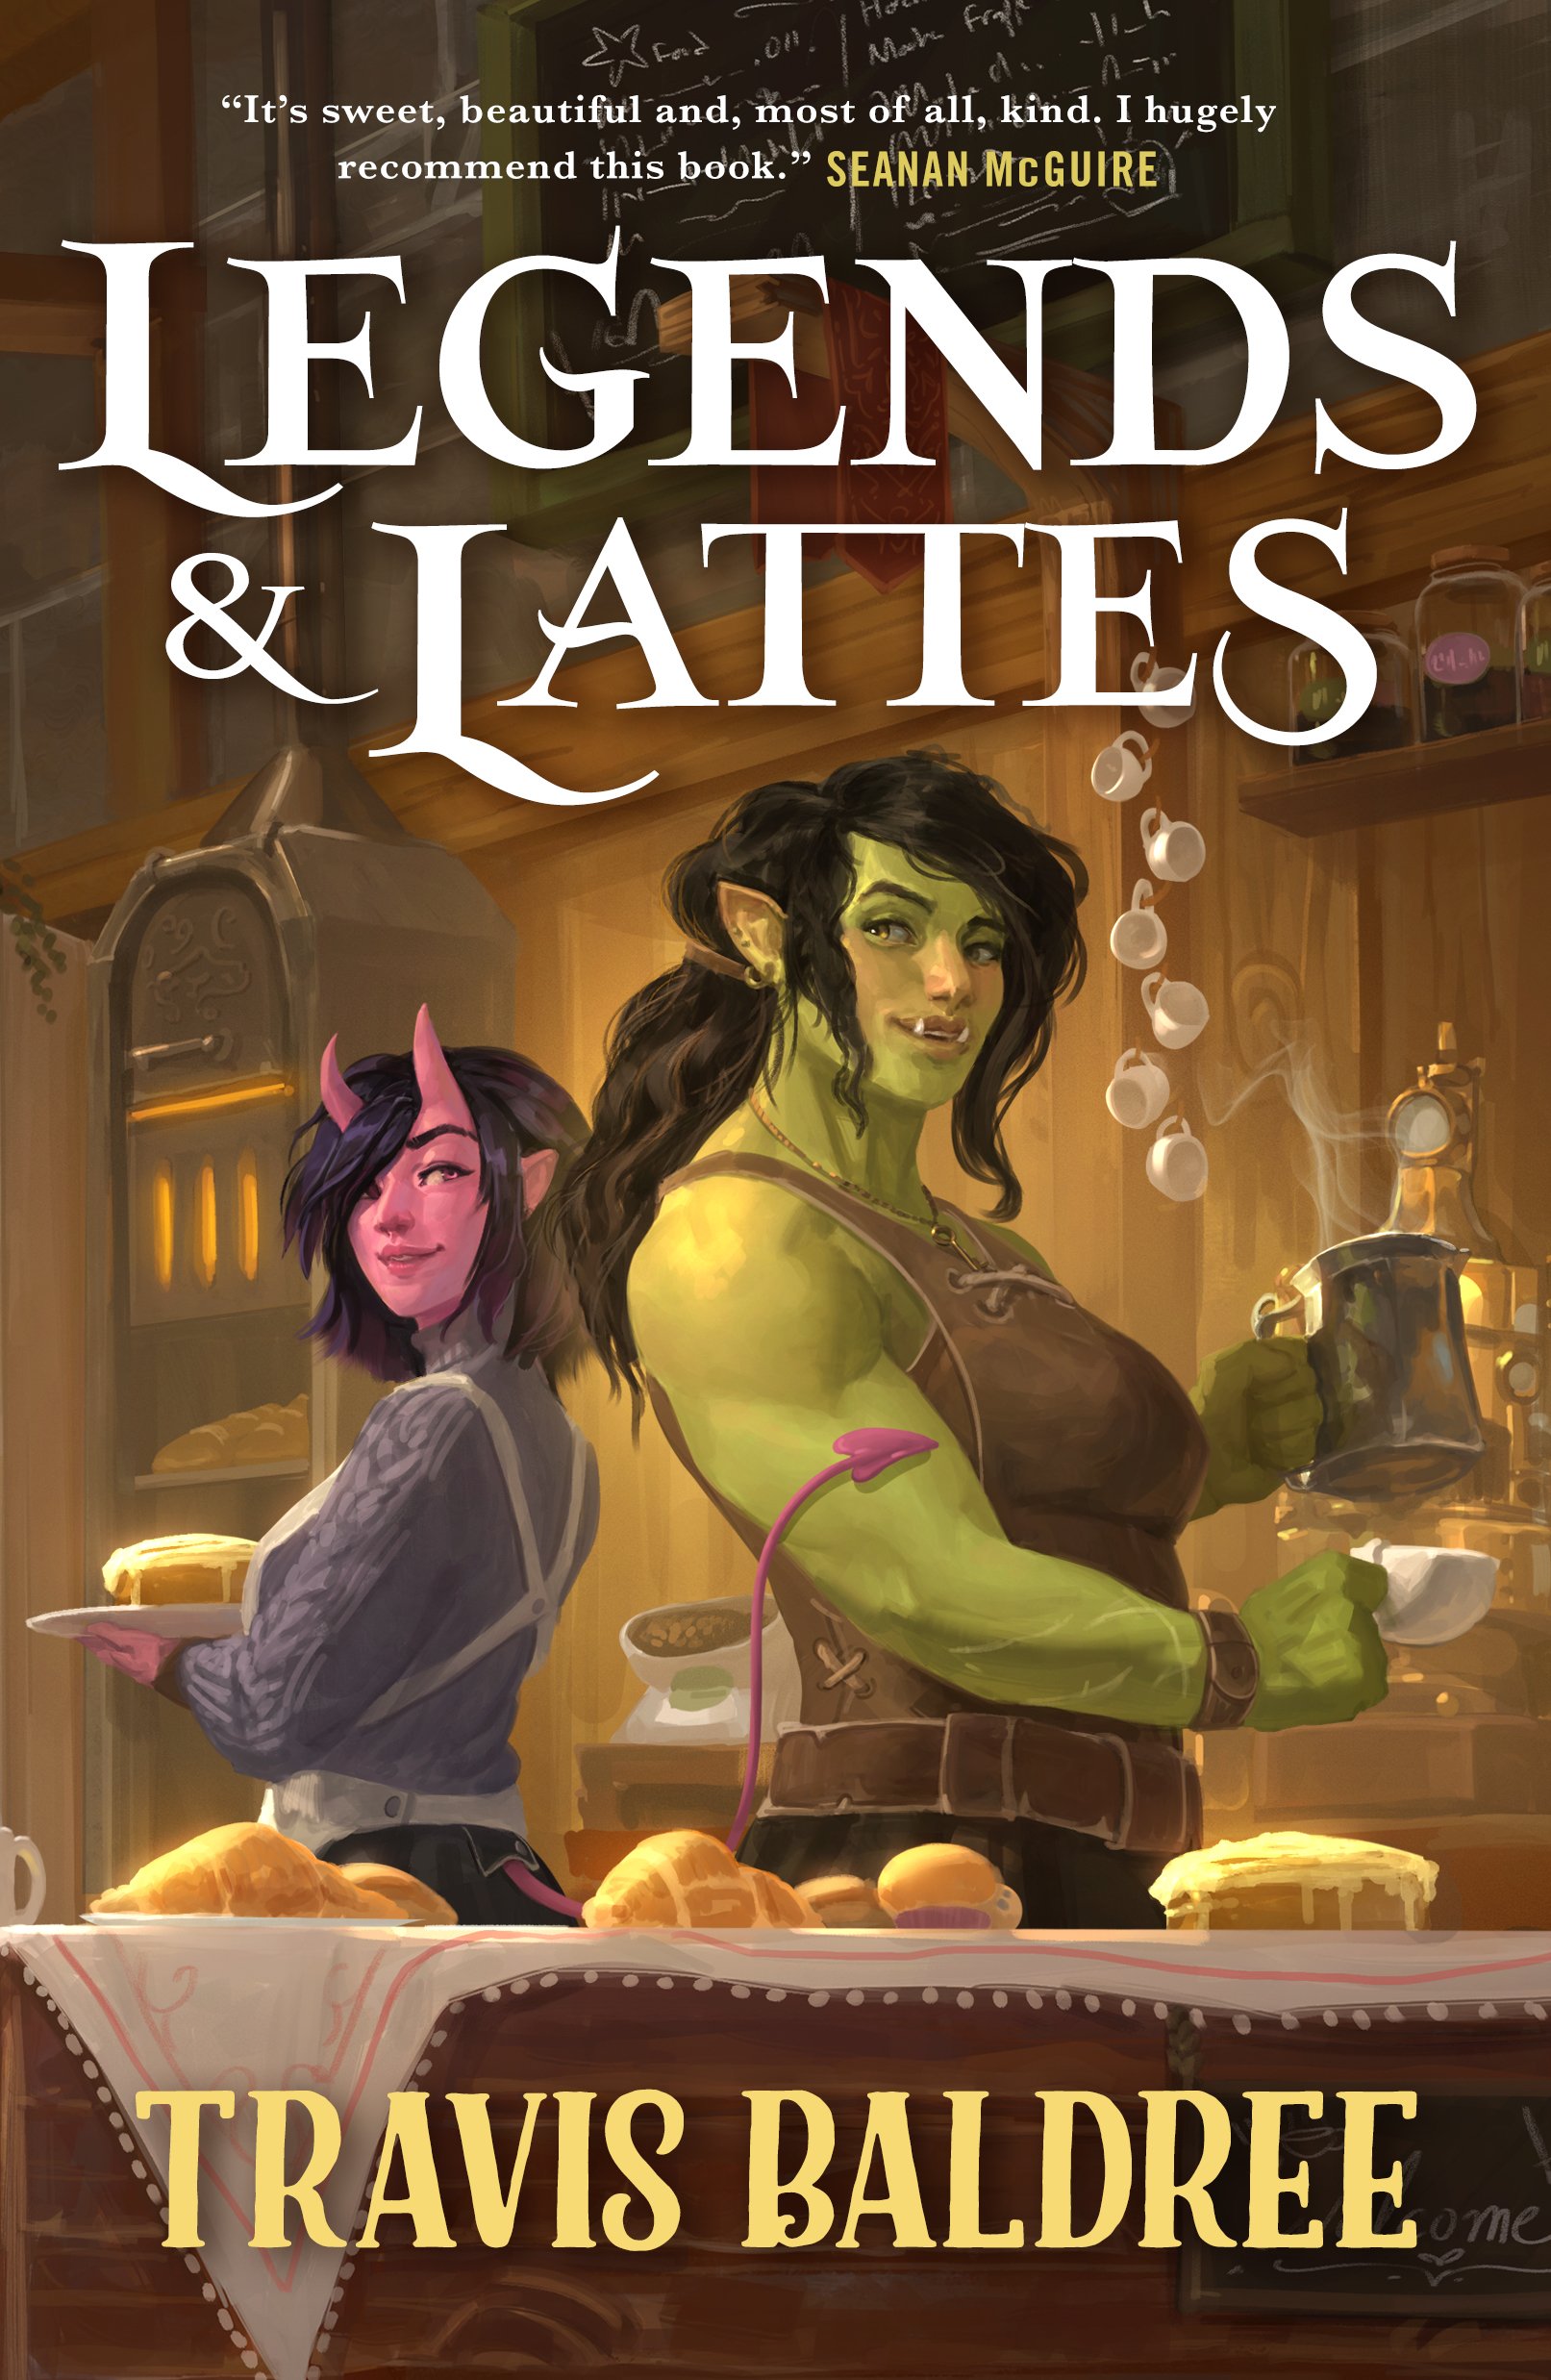 Legends and Lattes by Travis Baldree